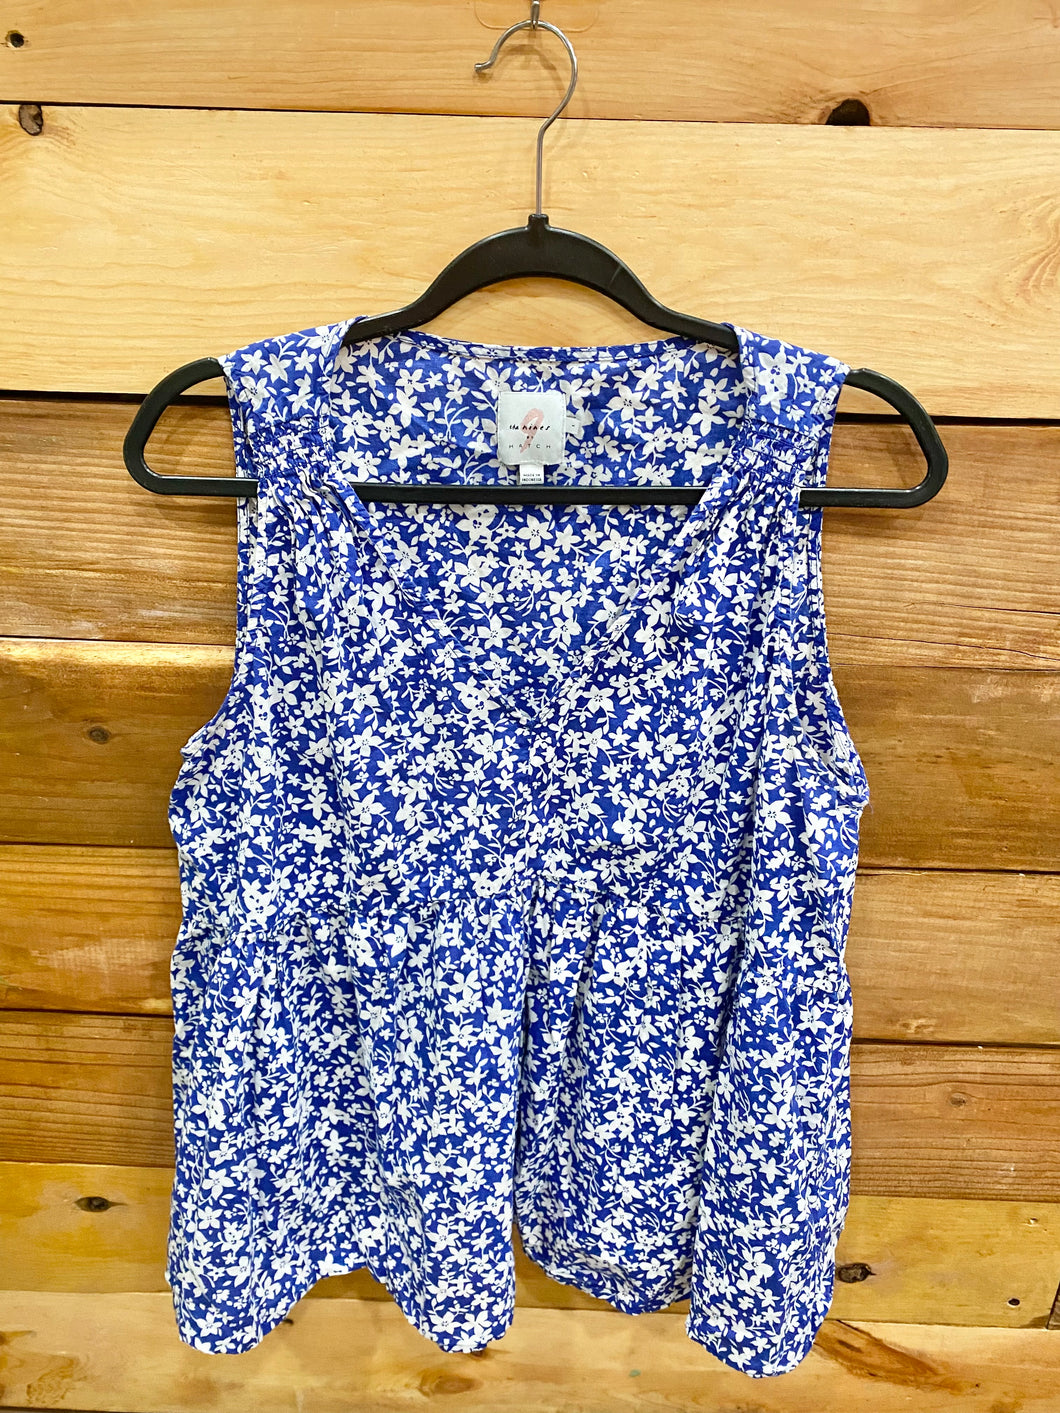 The Nines by Hatch Blue Flower Maternity Top Size Large